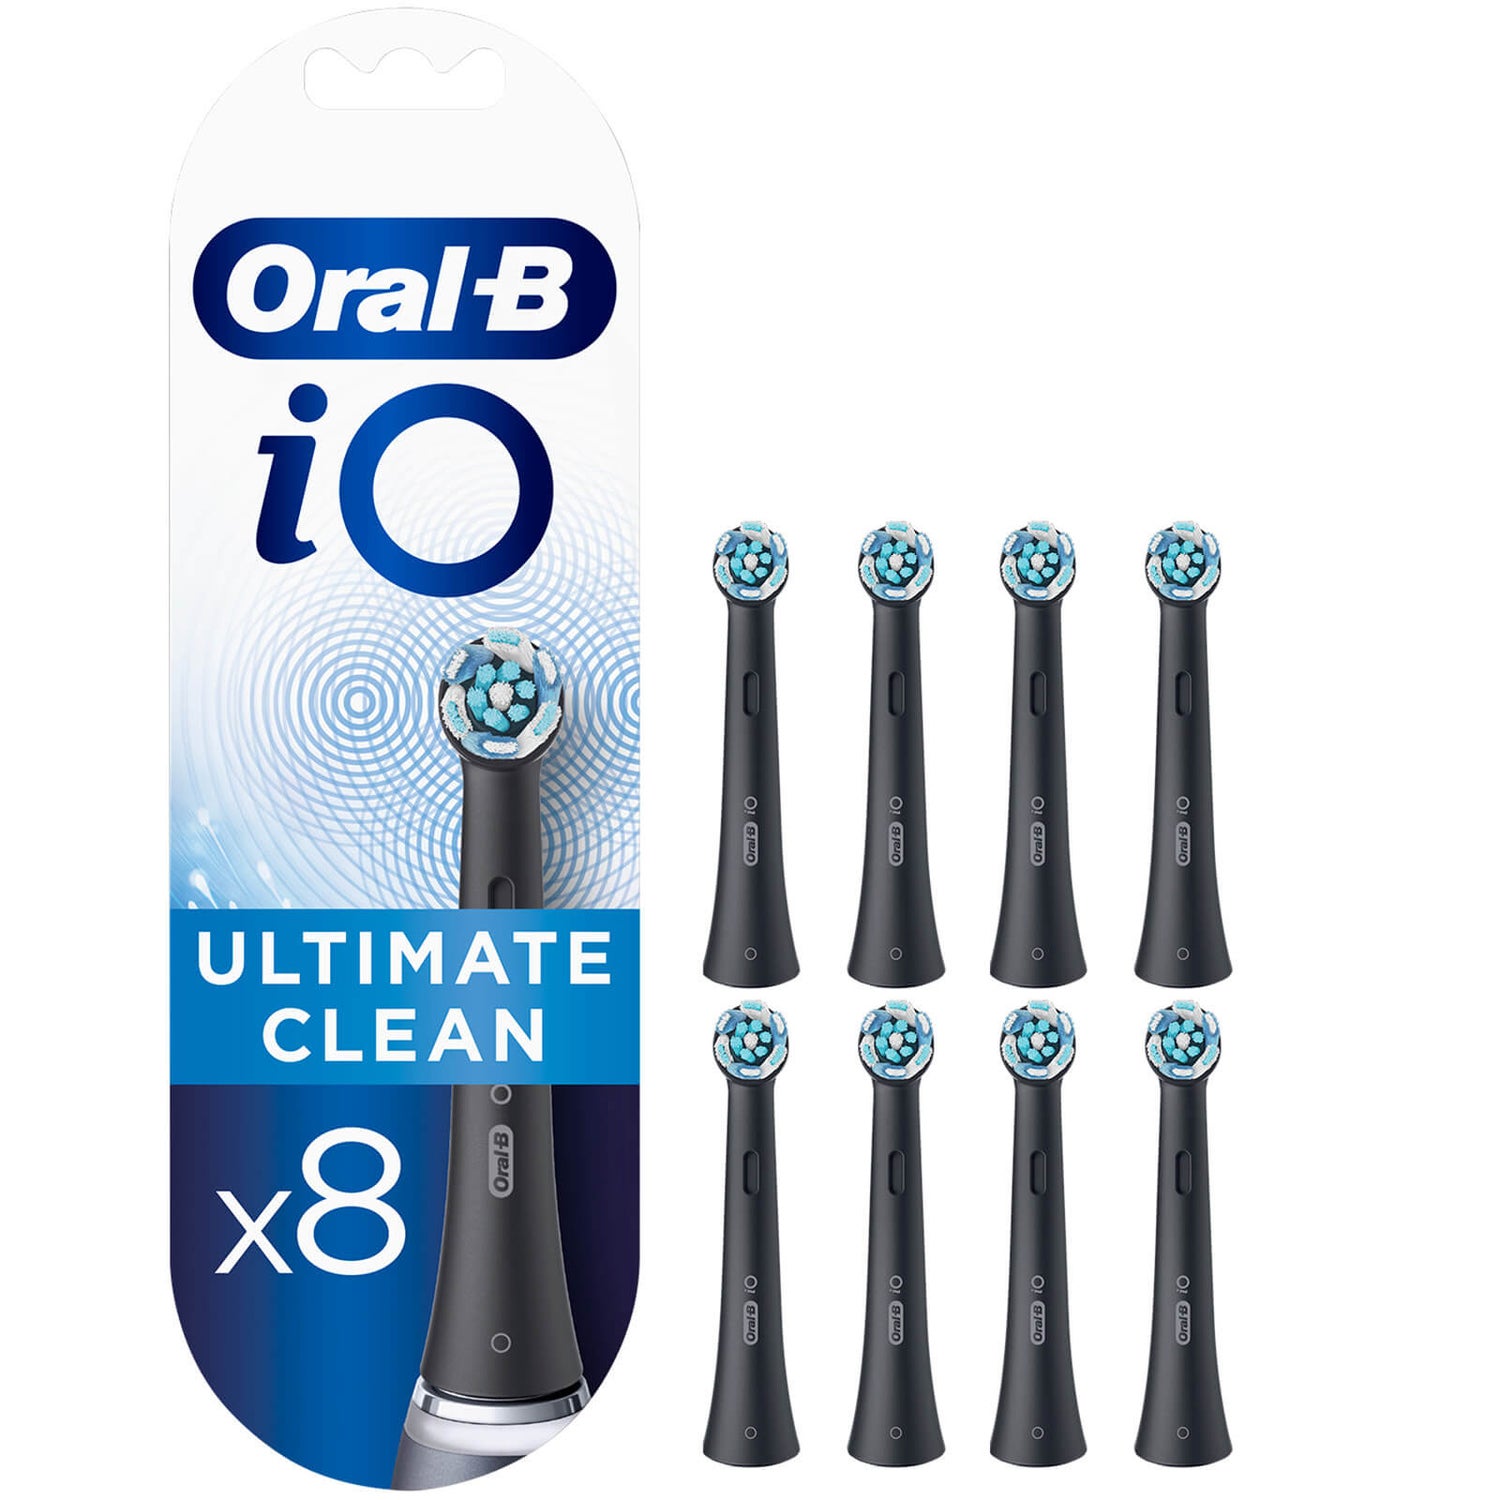 Oral-B iO Ultimate Clean Black Toothbrush Heads, Pack of 8 Counts